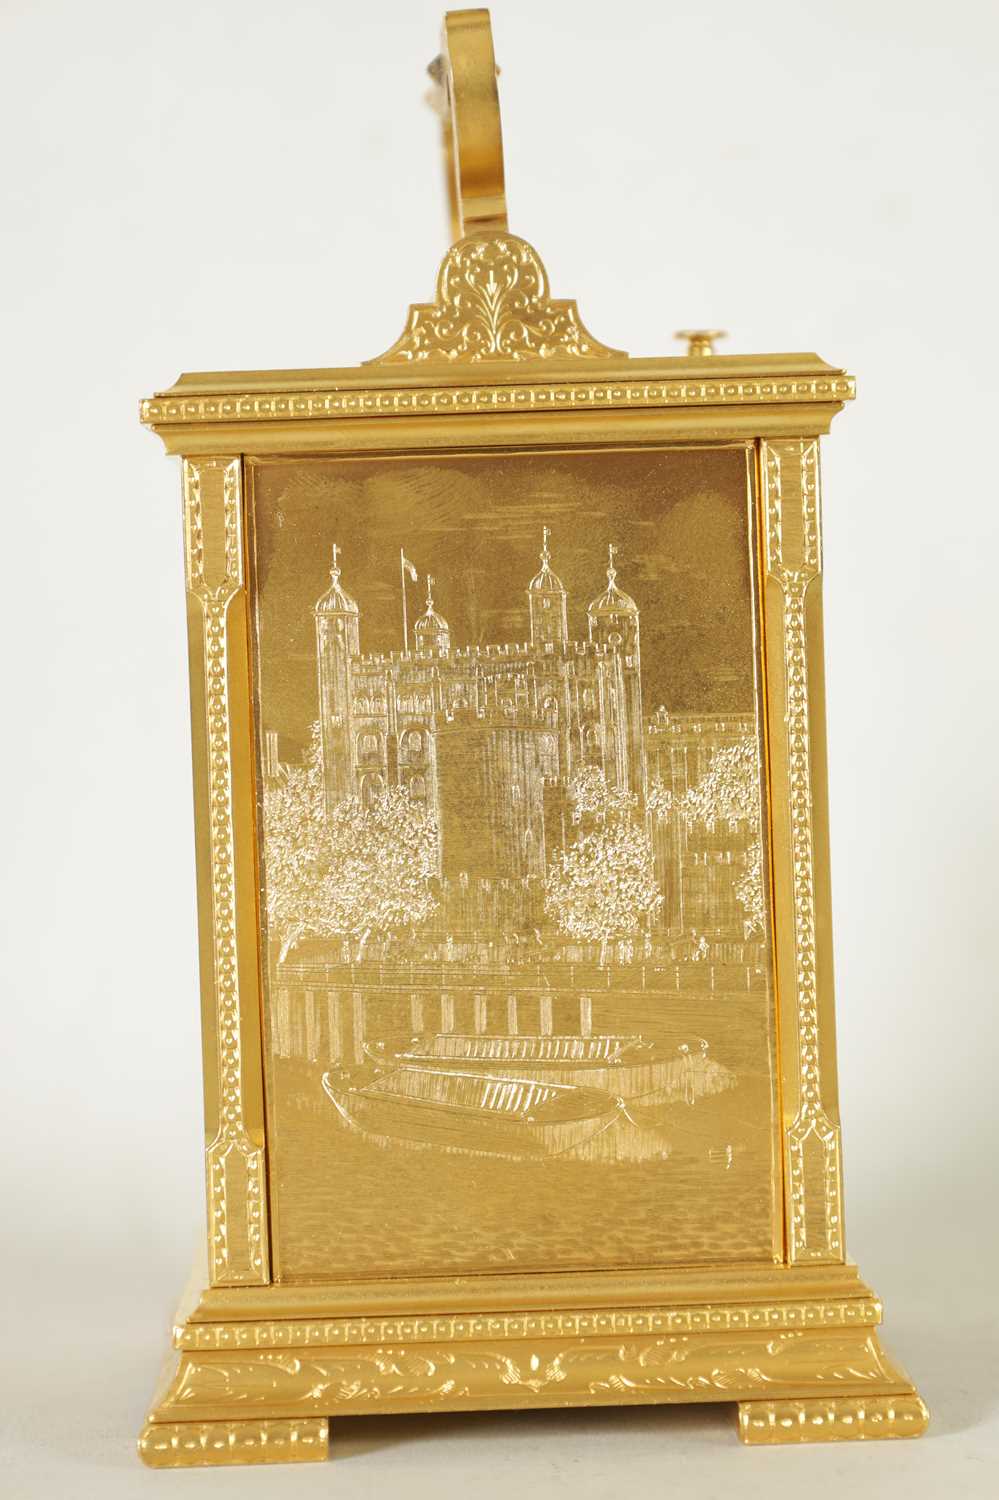 A FINELY ENGRAVED ENGLISH CASED REPEATING CARRIAGE CLOCK - Image 4 of 8